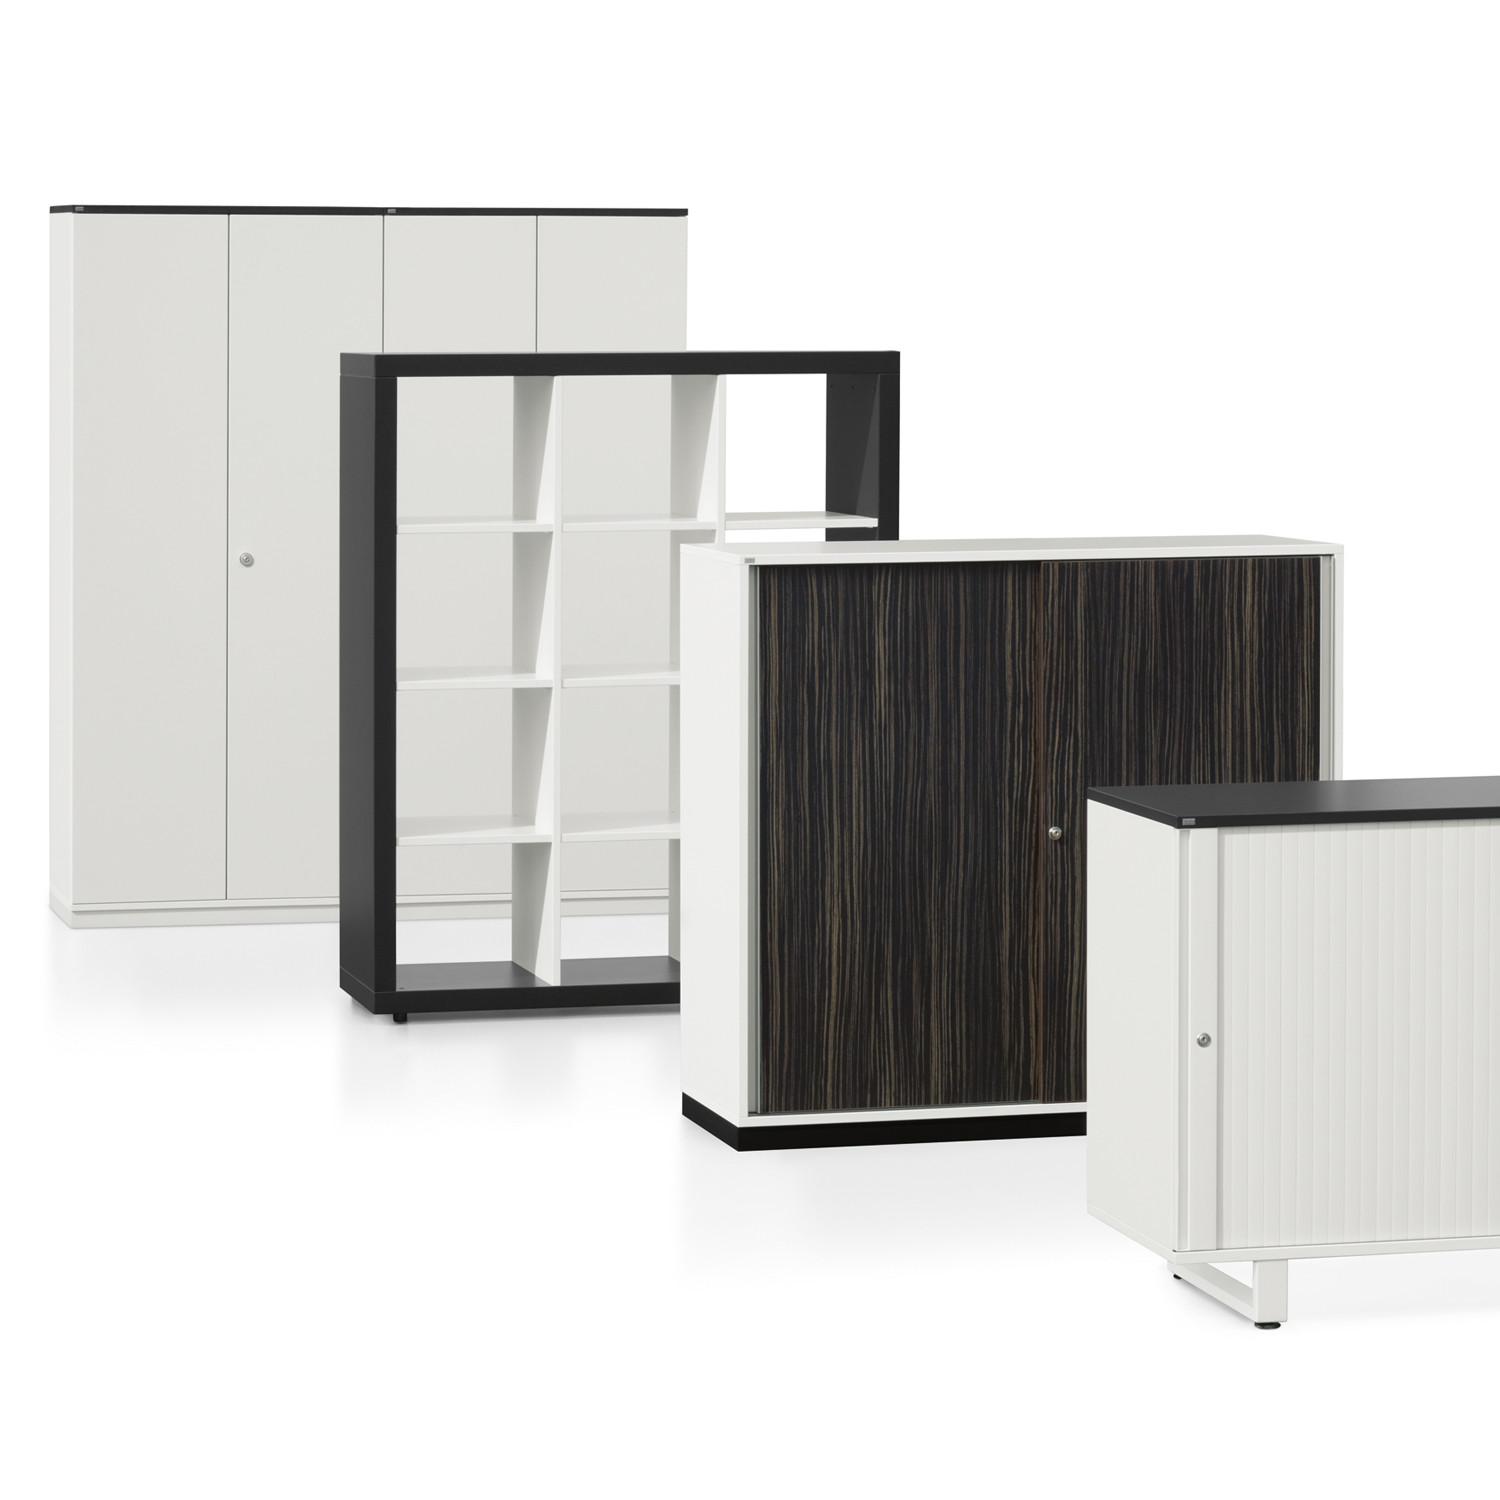 Grand Slam Office Storage Range is available in a wide range of finishes